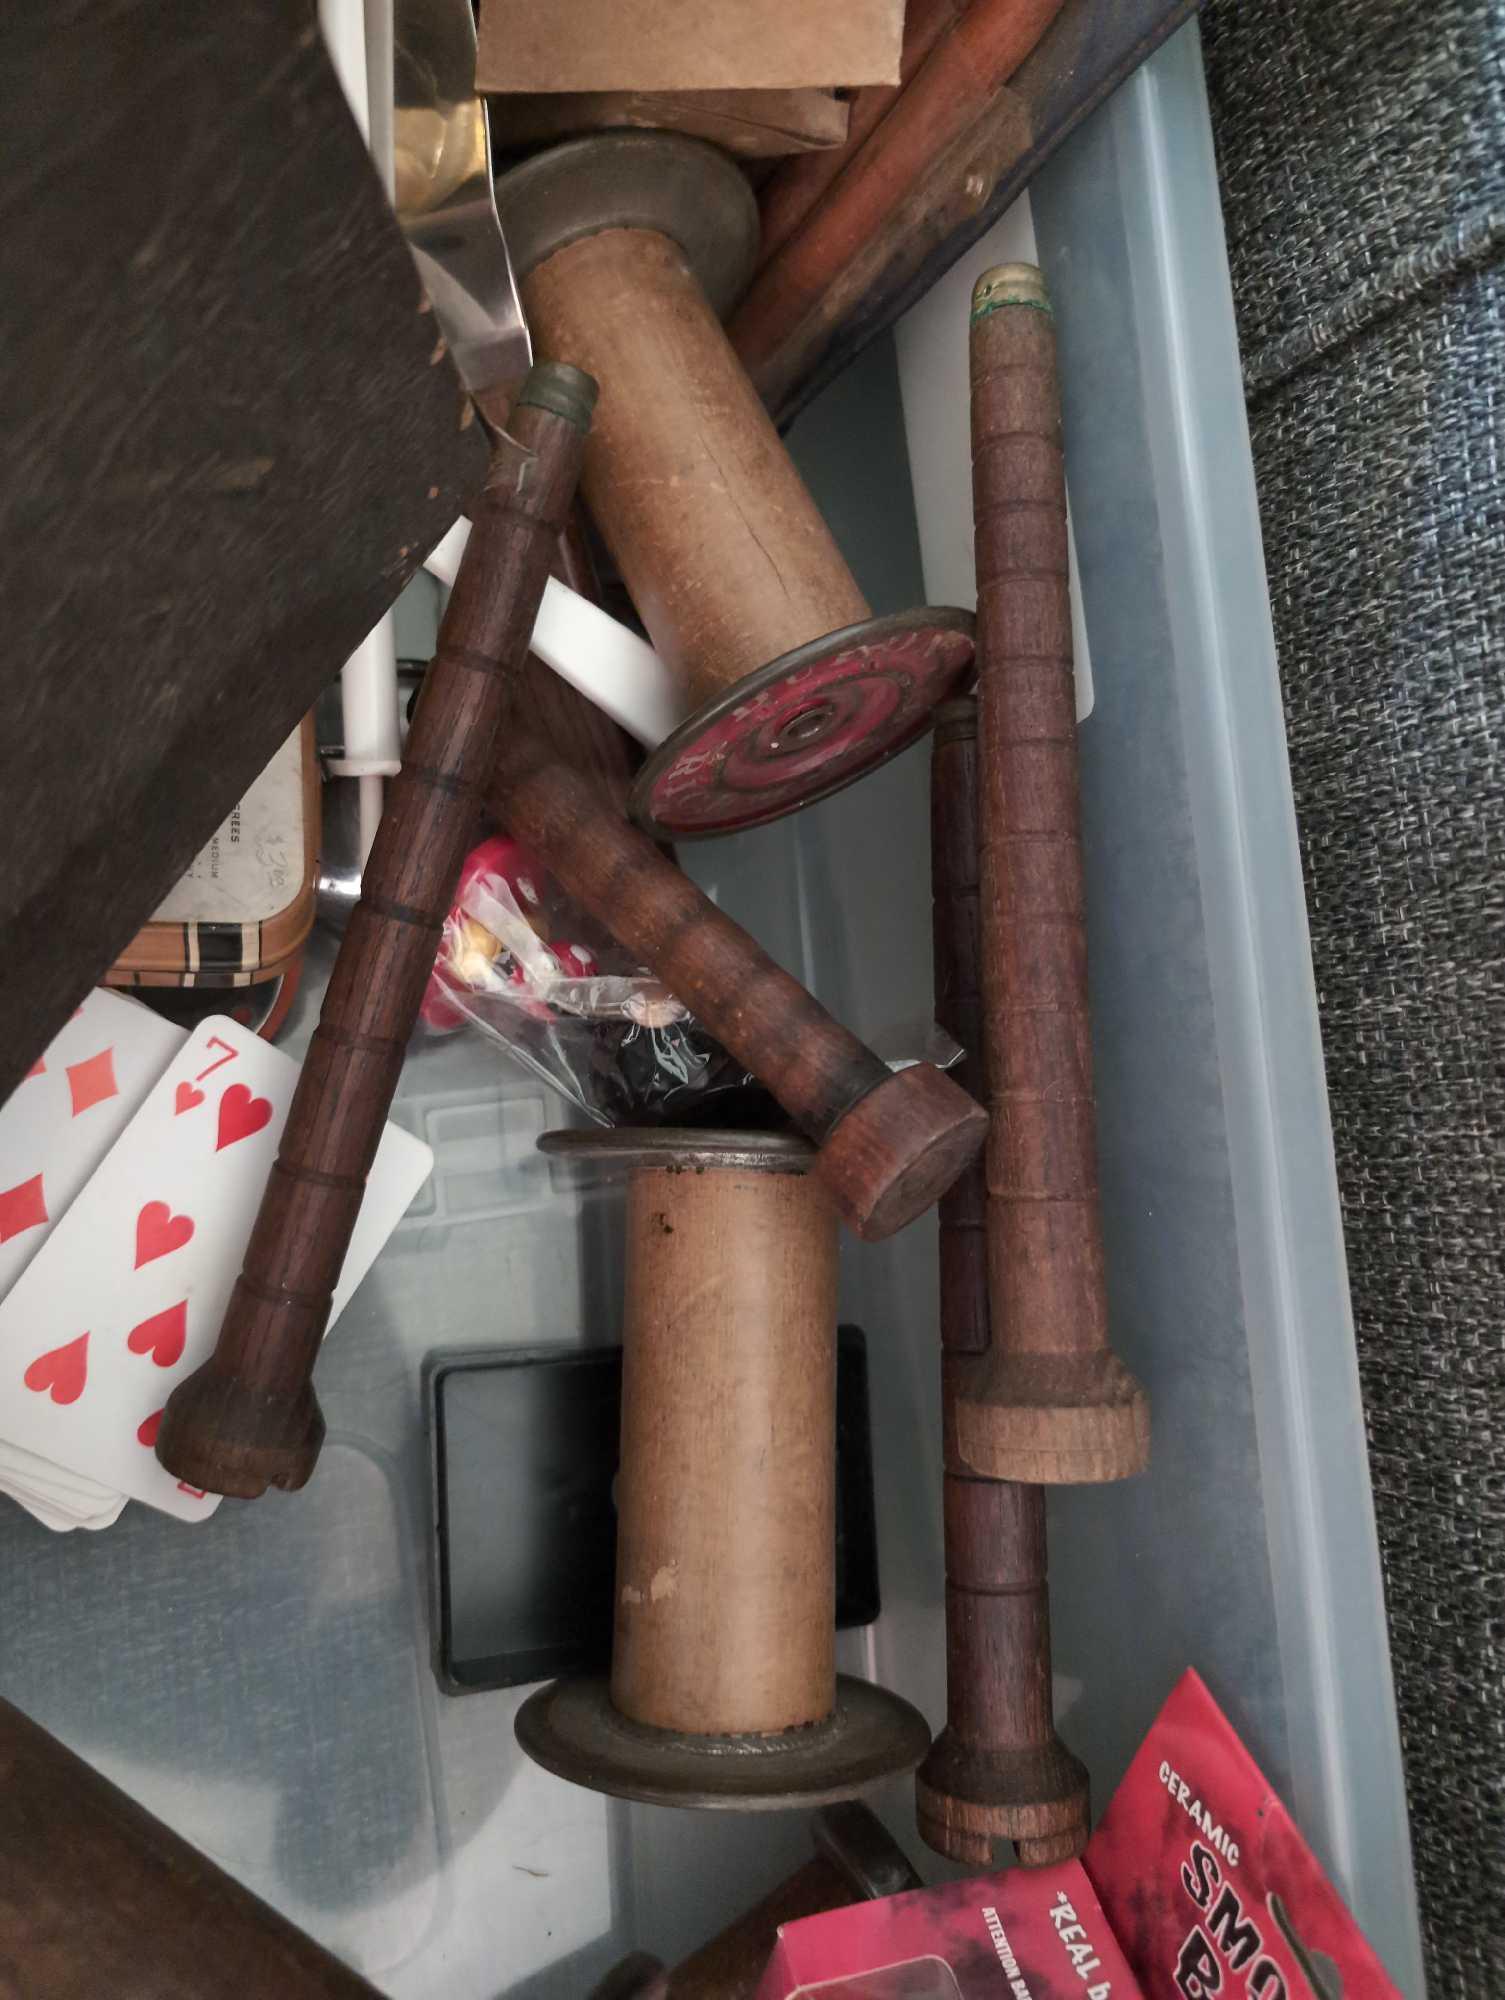 (LR) TUB LOT OF MISC. TO INCLUDE VINTAGE SPINDLES, WOOD CHISEL SETS, SMOKING BABY FIGURINE,